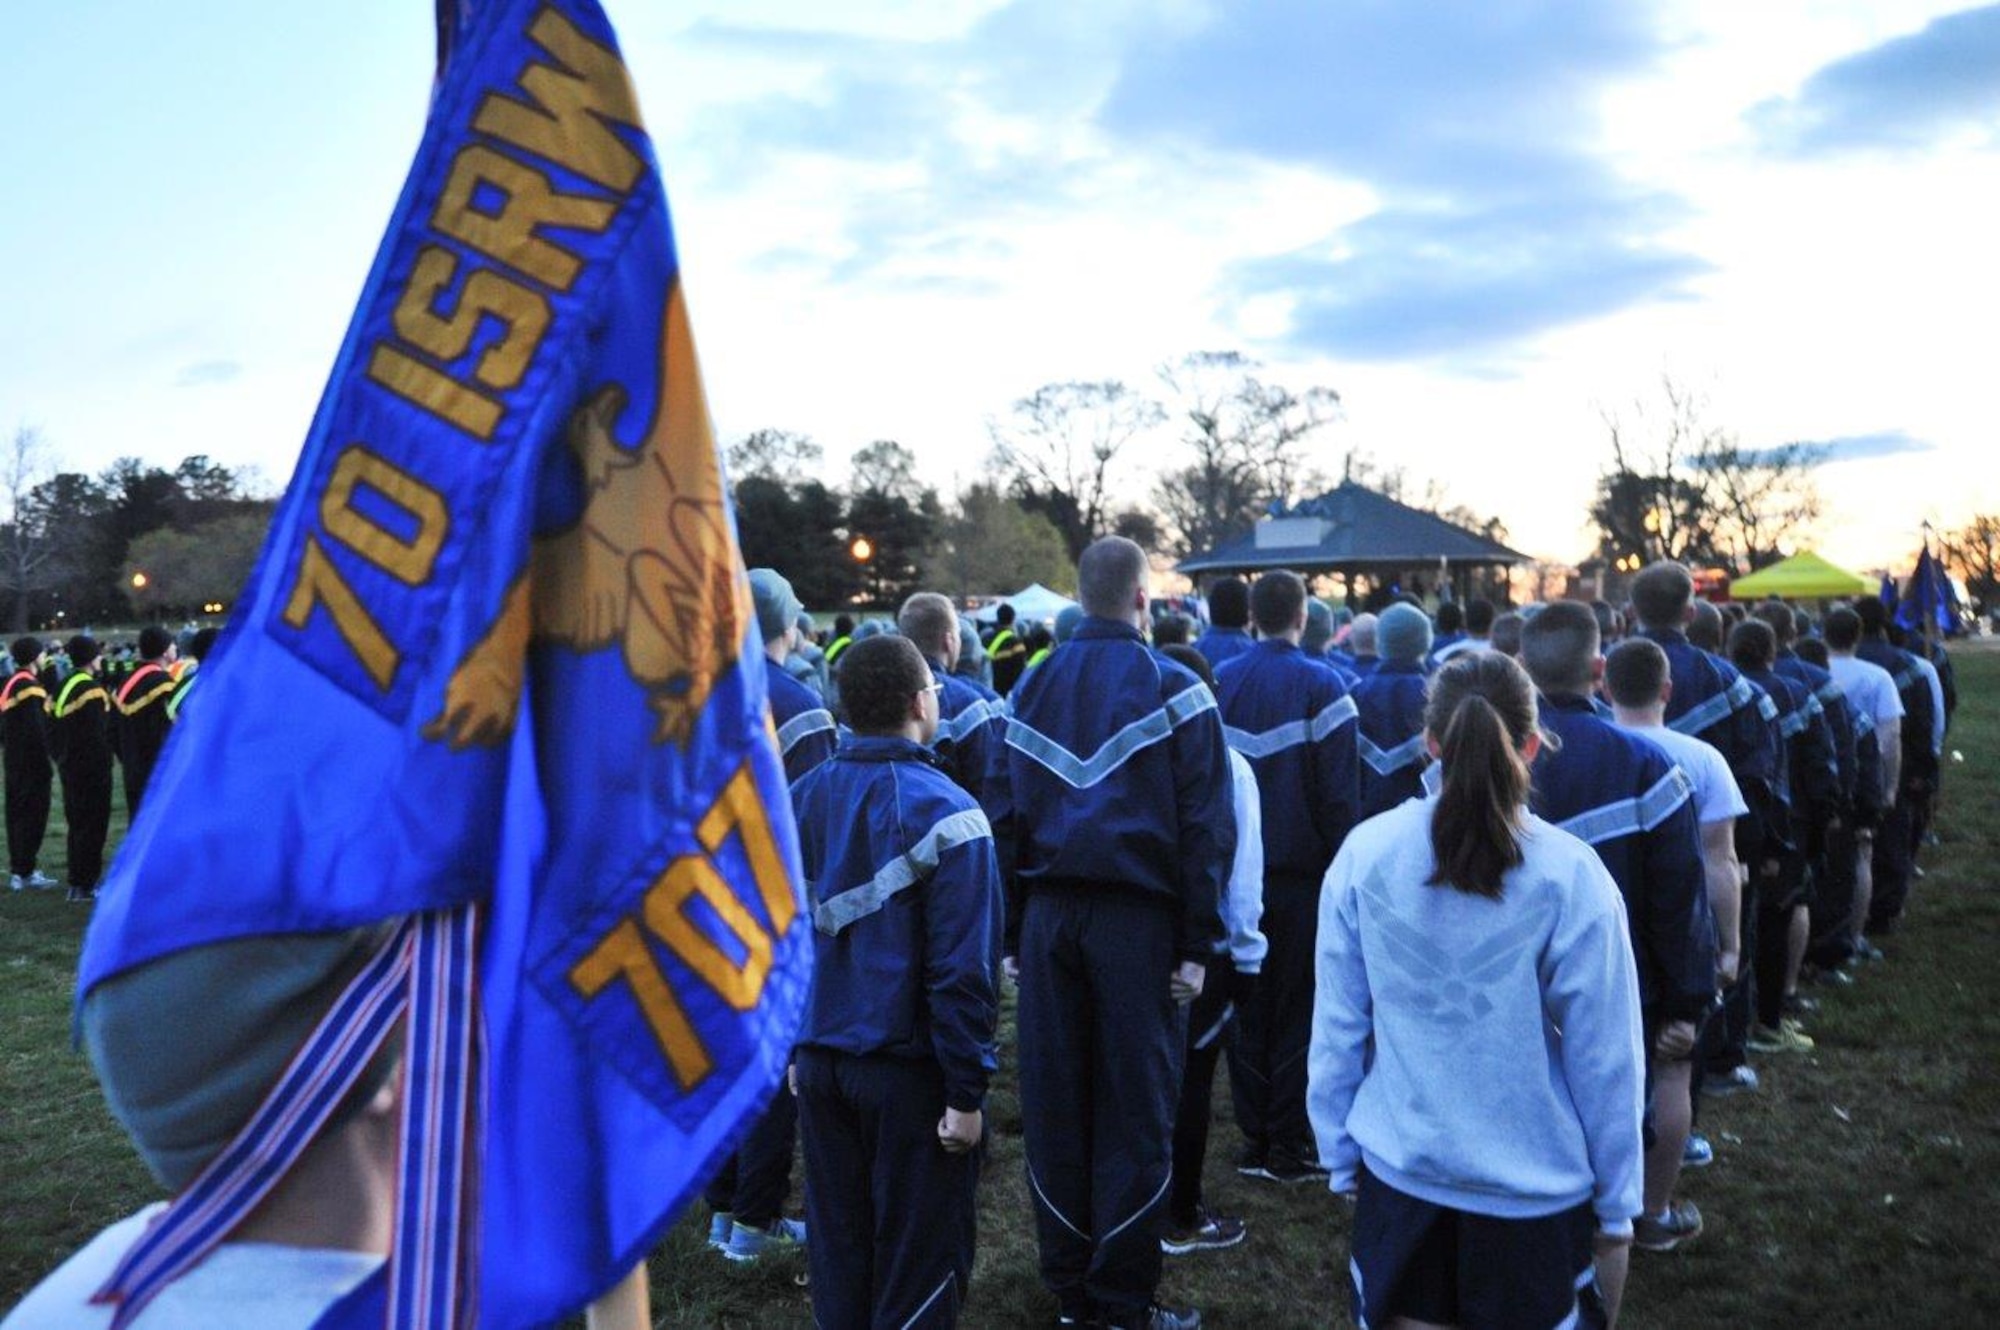 Airmen assigned to the 70th Intelligence, Surveillance and Reconnaissance Wing stand in formation and prepare to begin the 2016 Sexual Assault, Awareness and Prevention Month garrison run April 8, 2016 at Fort George G. Meade, Md. There were over 1,900 joint service members participating in the SAAPM event. (U.S. Air Force photo/Staff Sgt. Alexandre Montes)